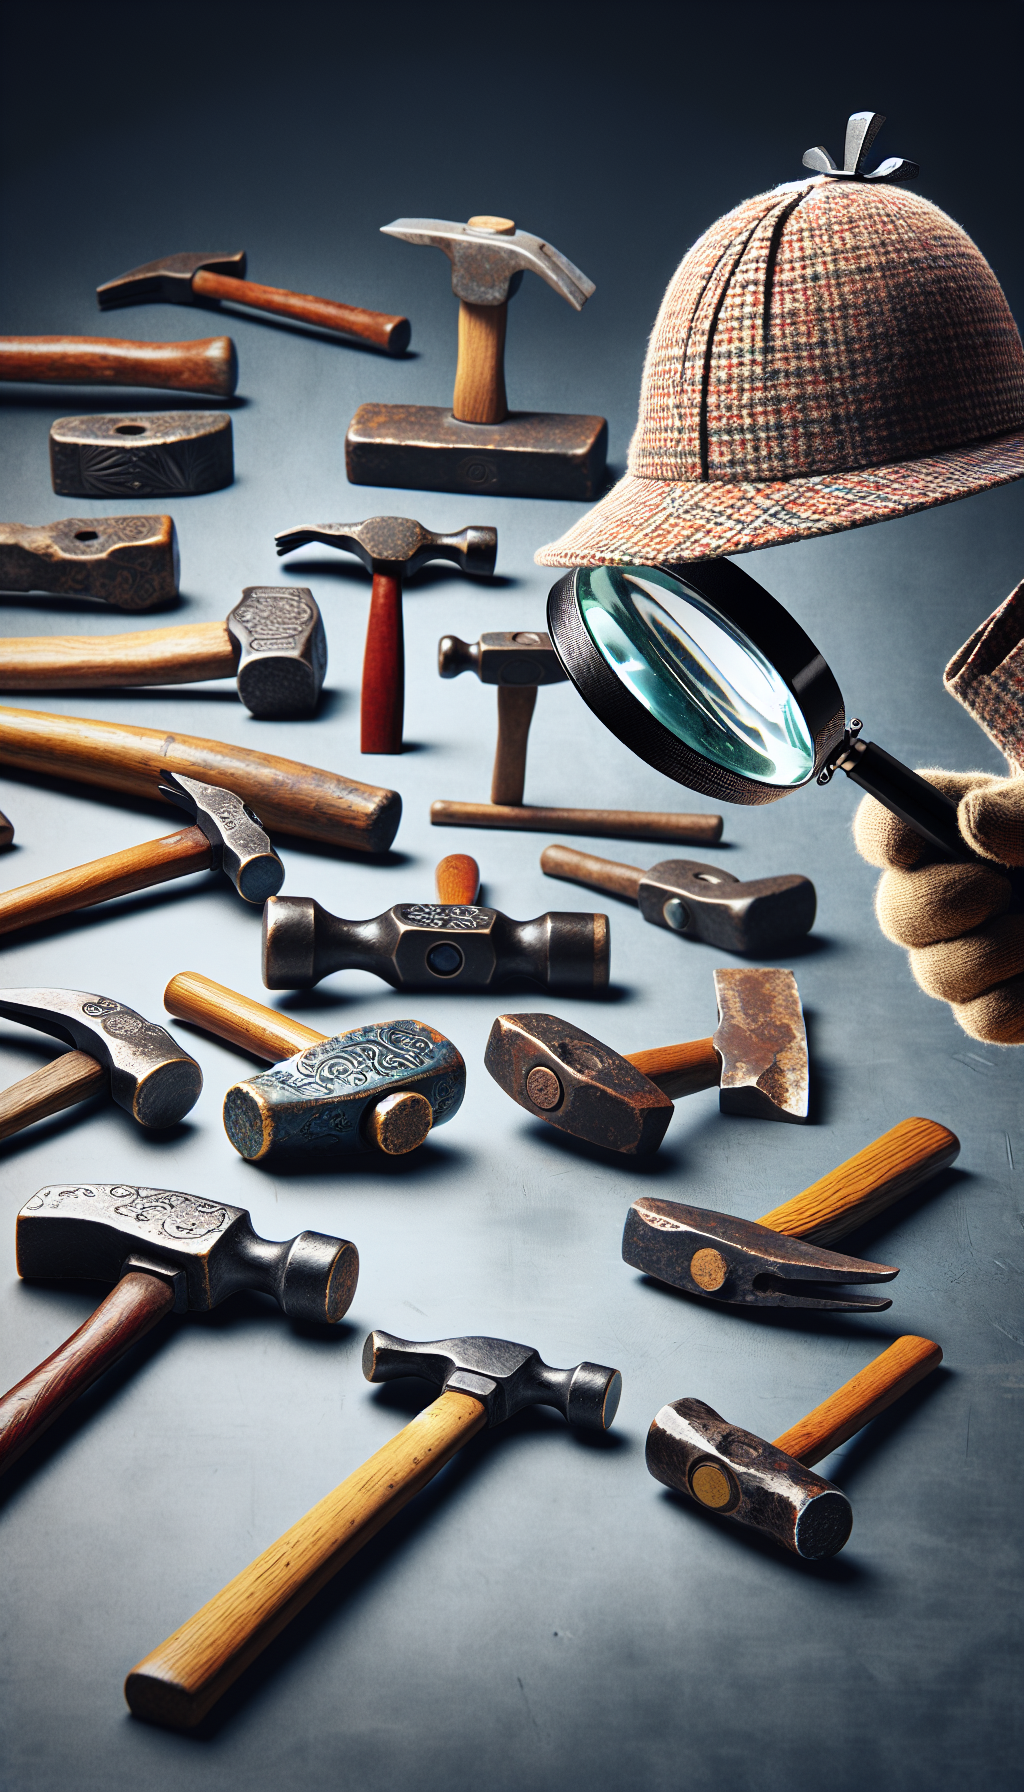 An anthropomorphic magnifying glass adorned with a deerstalker detective hat carefully examines an array of antique hammers suspended in time. Each hammer boasts intricate engravings and unique materials, from wooden handles to iron heads, with ethereal labels identifying their era and craftsmanship. The magnifying glass's keen eye highlights textures and patterns, symbolizing the meticulous process of antique hammer identification.